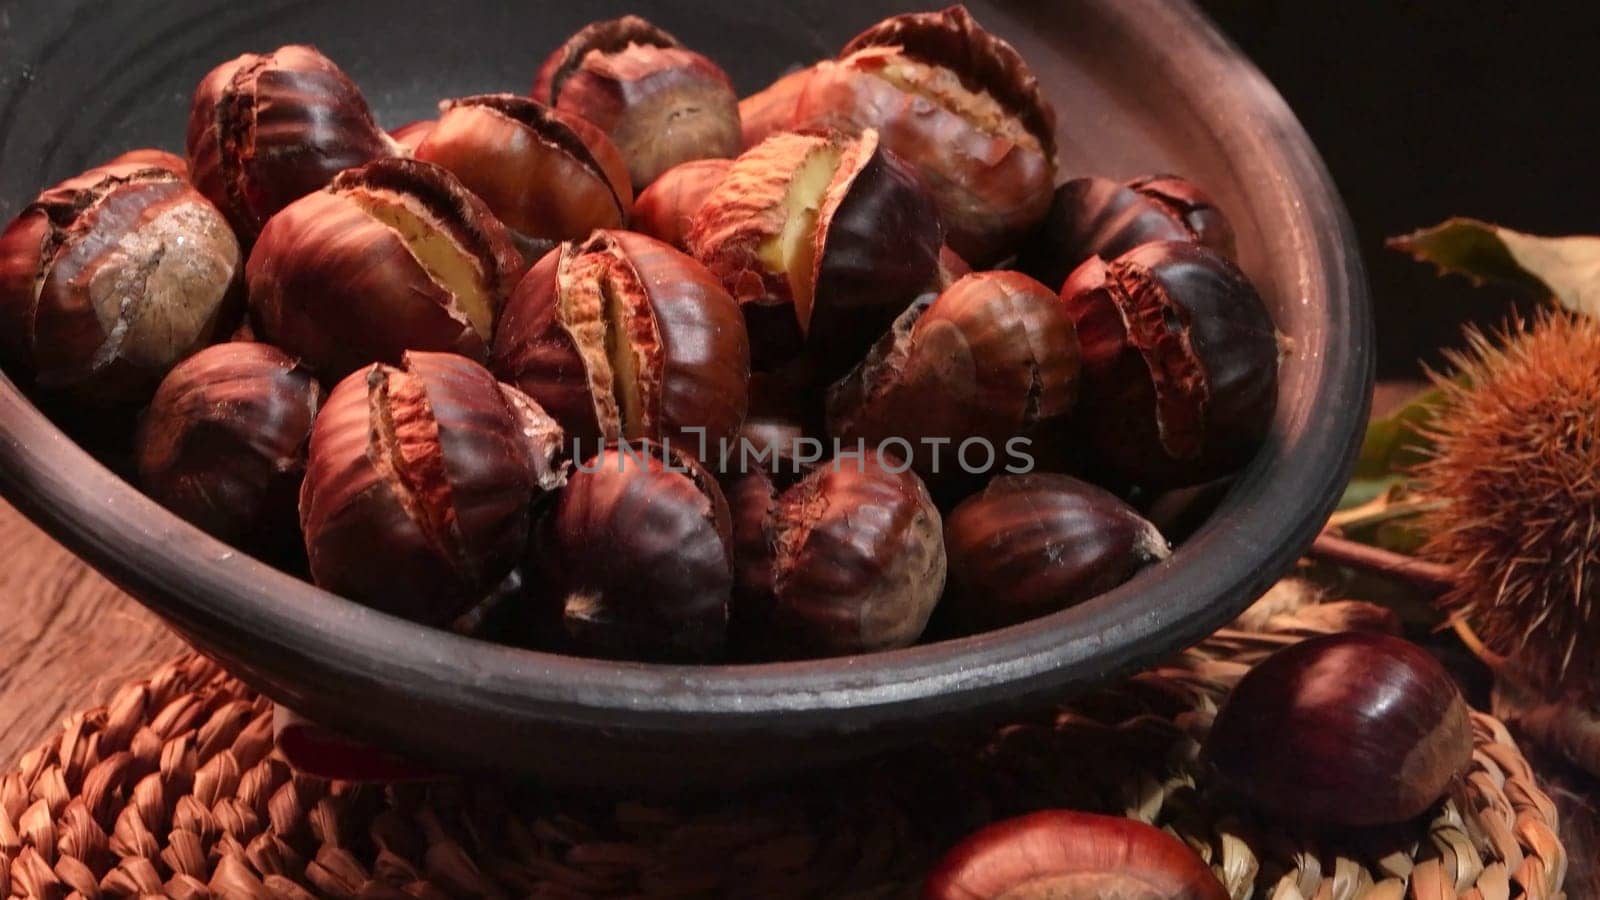 Roasted chestnuts on a rustic wooden table with autumn leaves in the background.